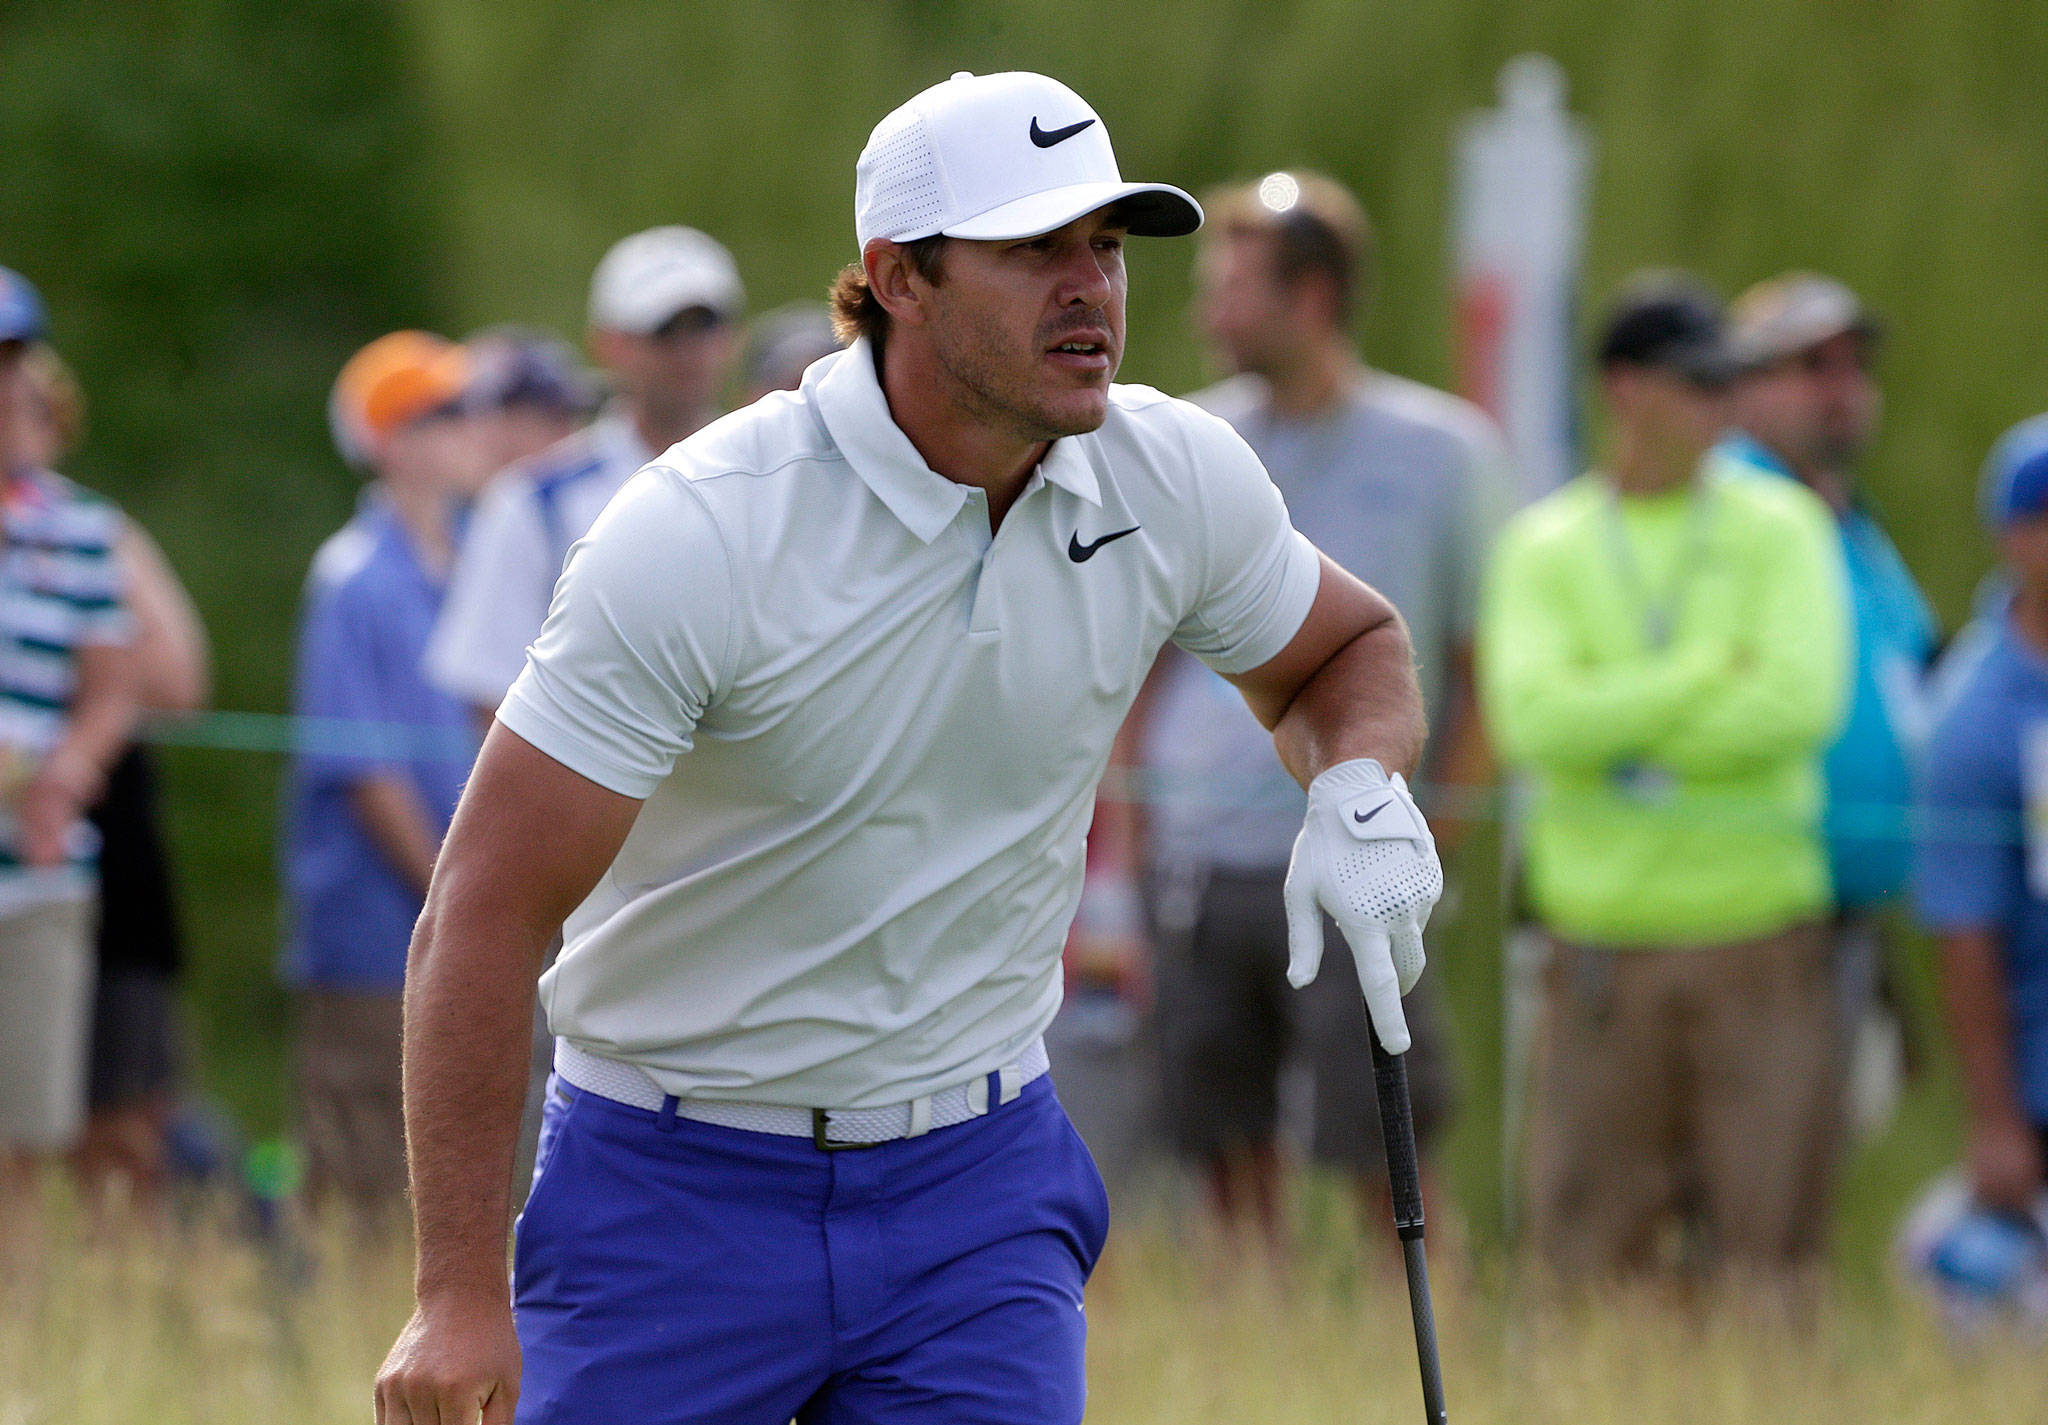 (Rick Wood | Milwaukee Journal Sentinel) Brooks Koepka watches his shot after he tees off on hole No. 1 during the opening round of the 2017 U.S. Open Championship at Erin Hills on Thursday.